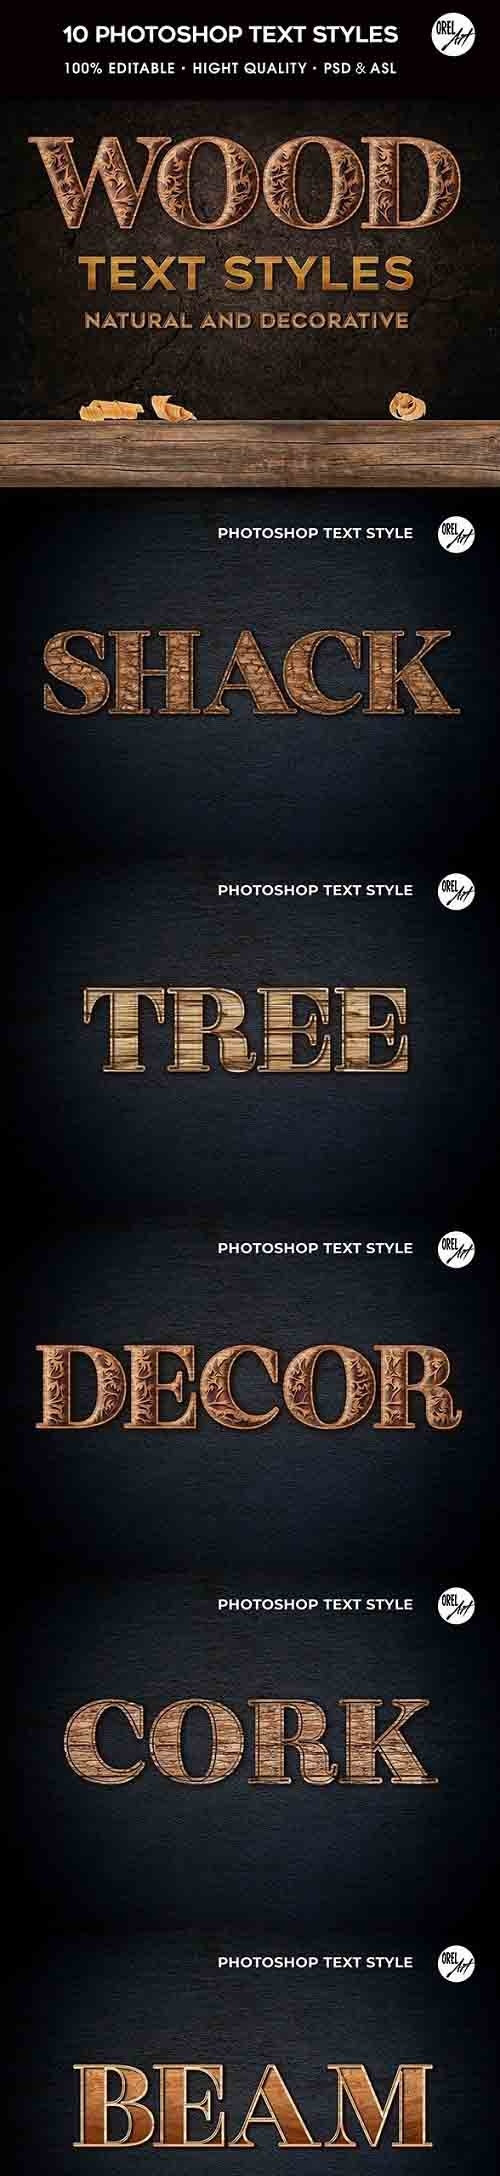 GraphicRiver - Wood Photoshop Styles 30366448